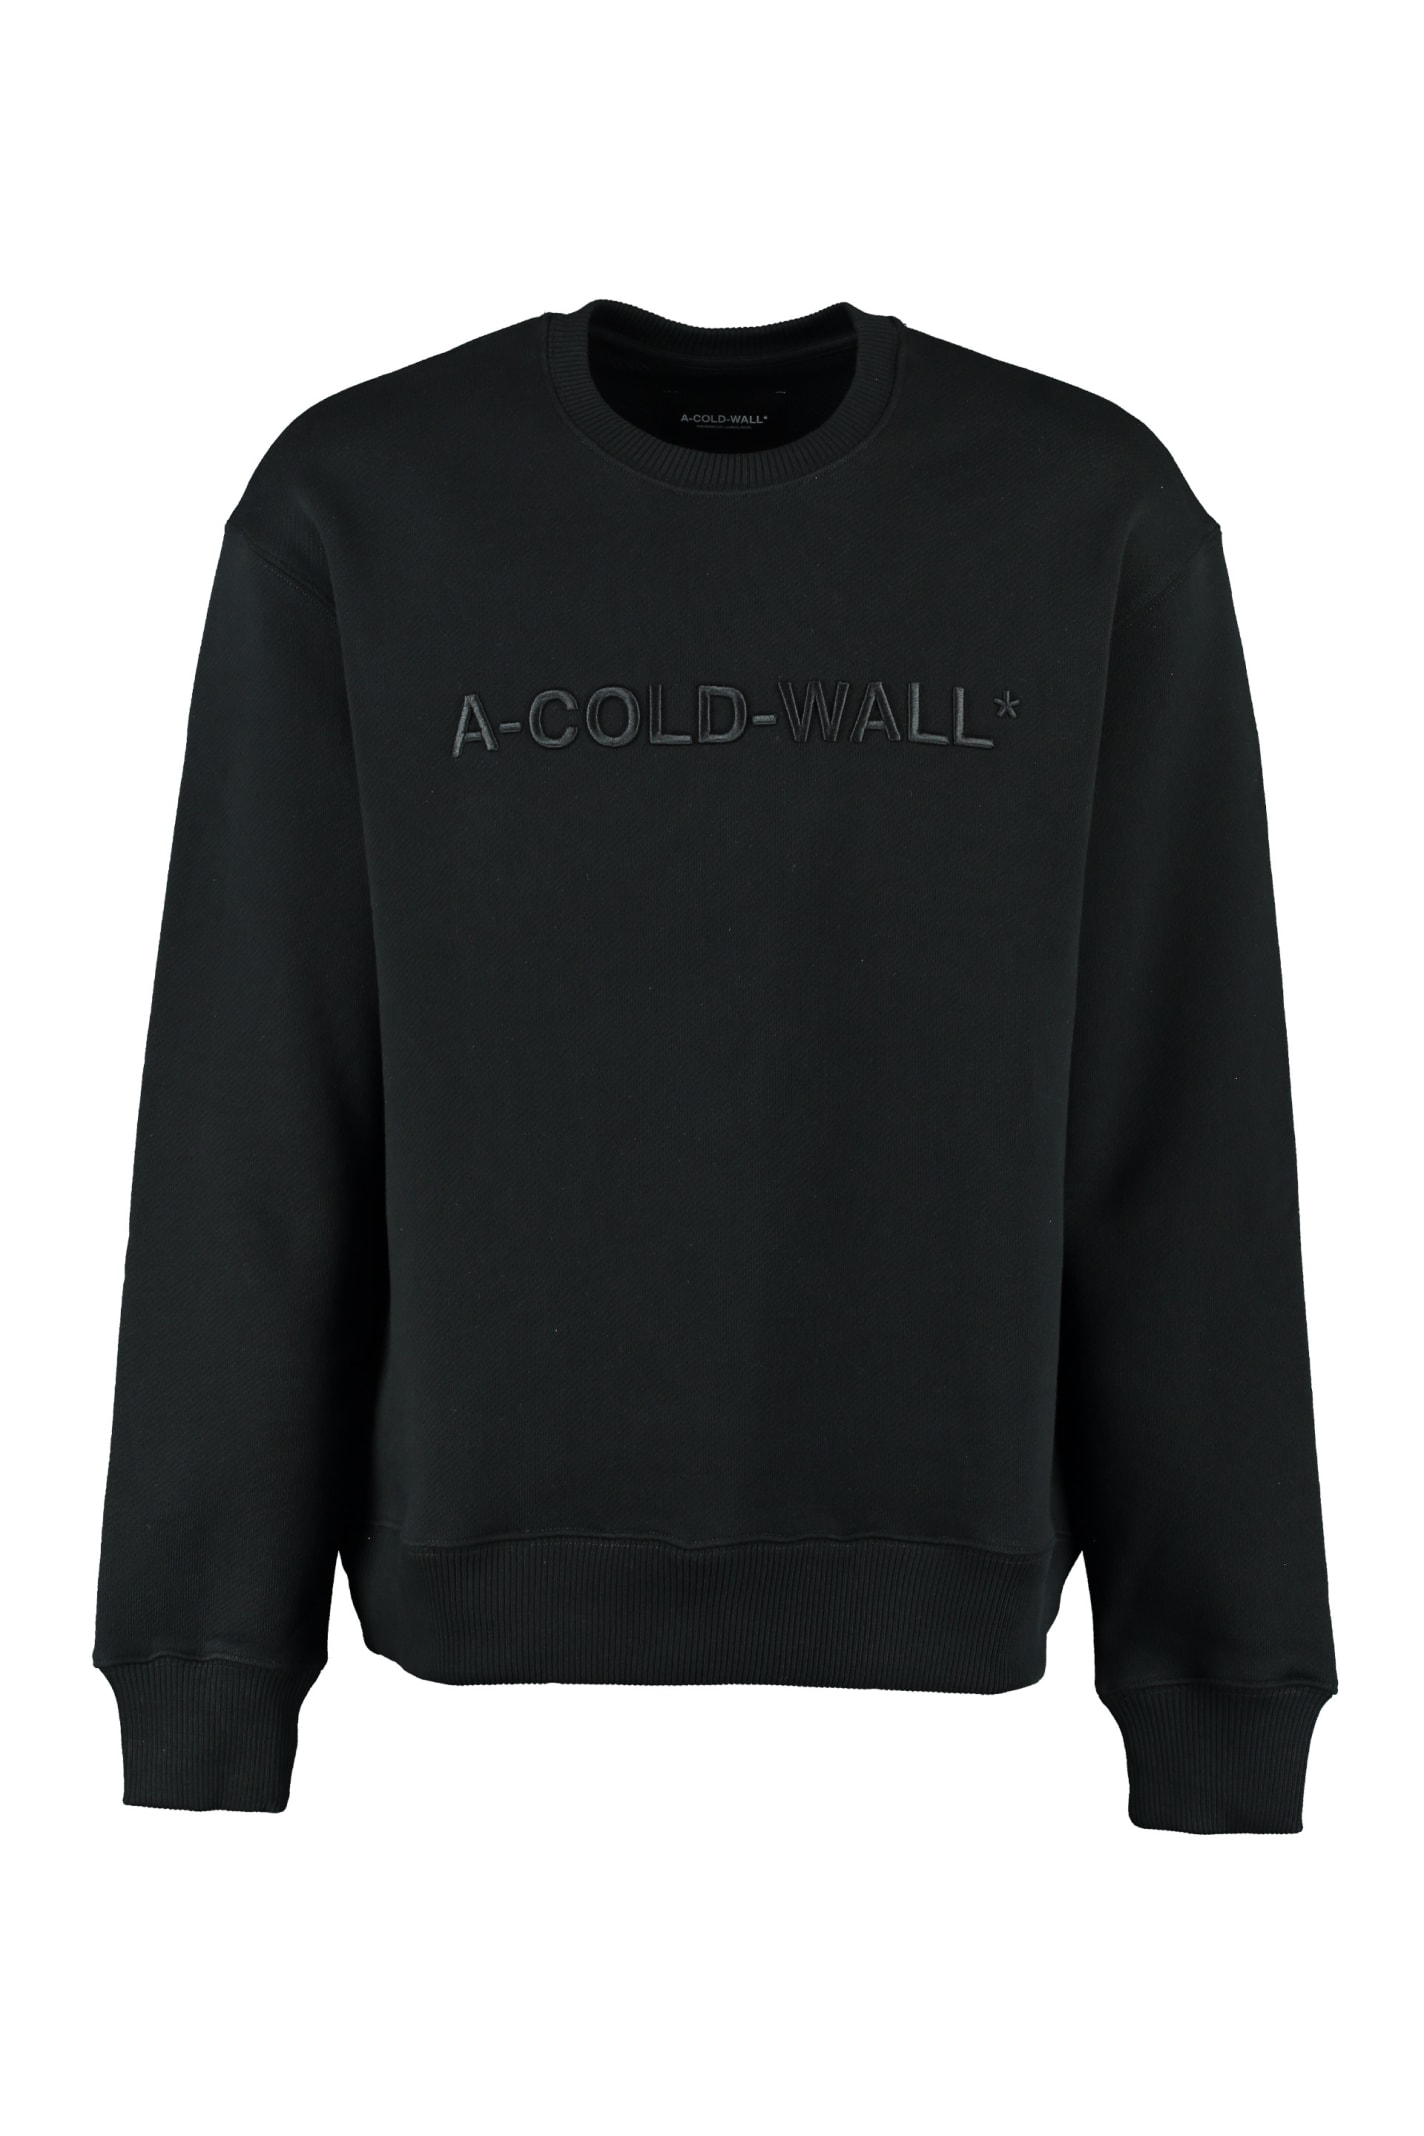 A-COLD-WALL Logo Embroidered Cotton Sweatshirt